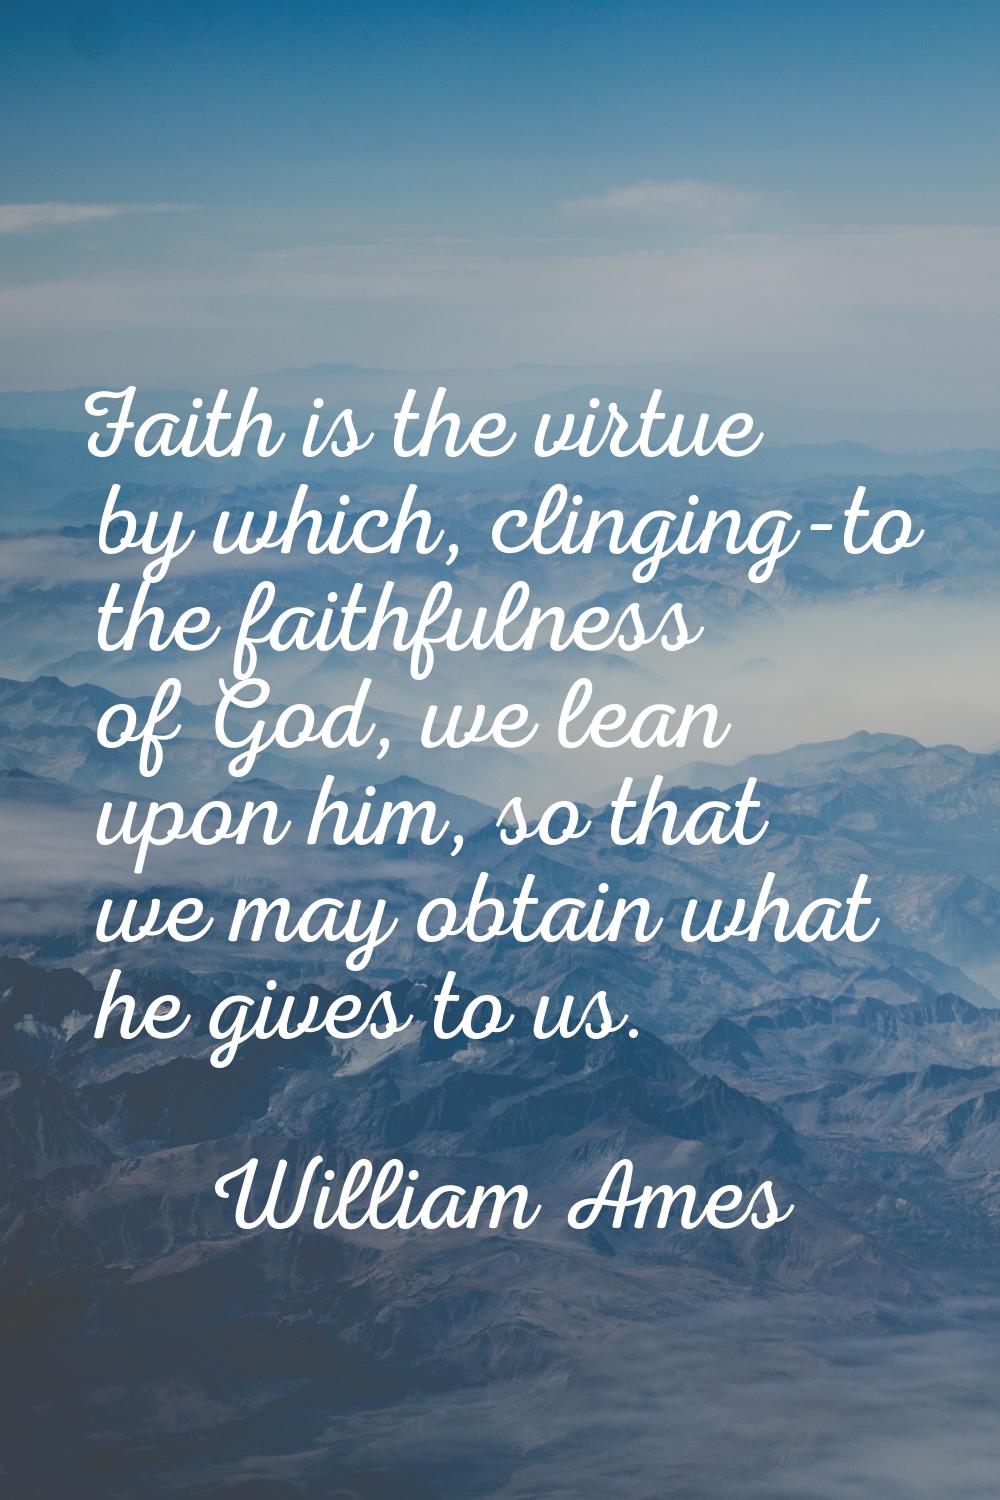 Faith is the virtue by which, clinging-to the faithfulness of God, we lean upon him, so that we may